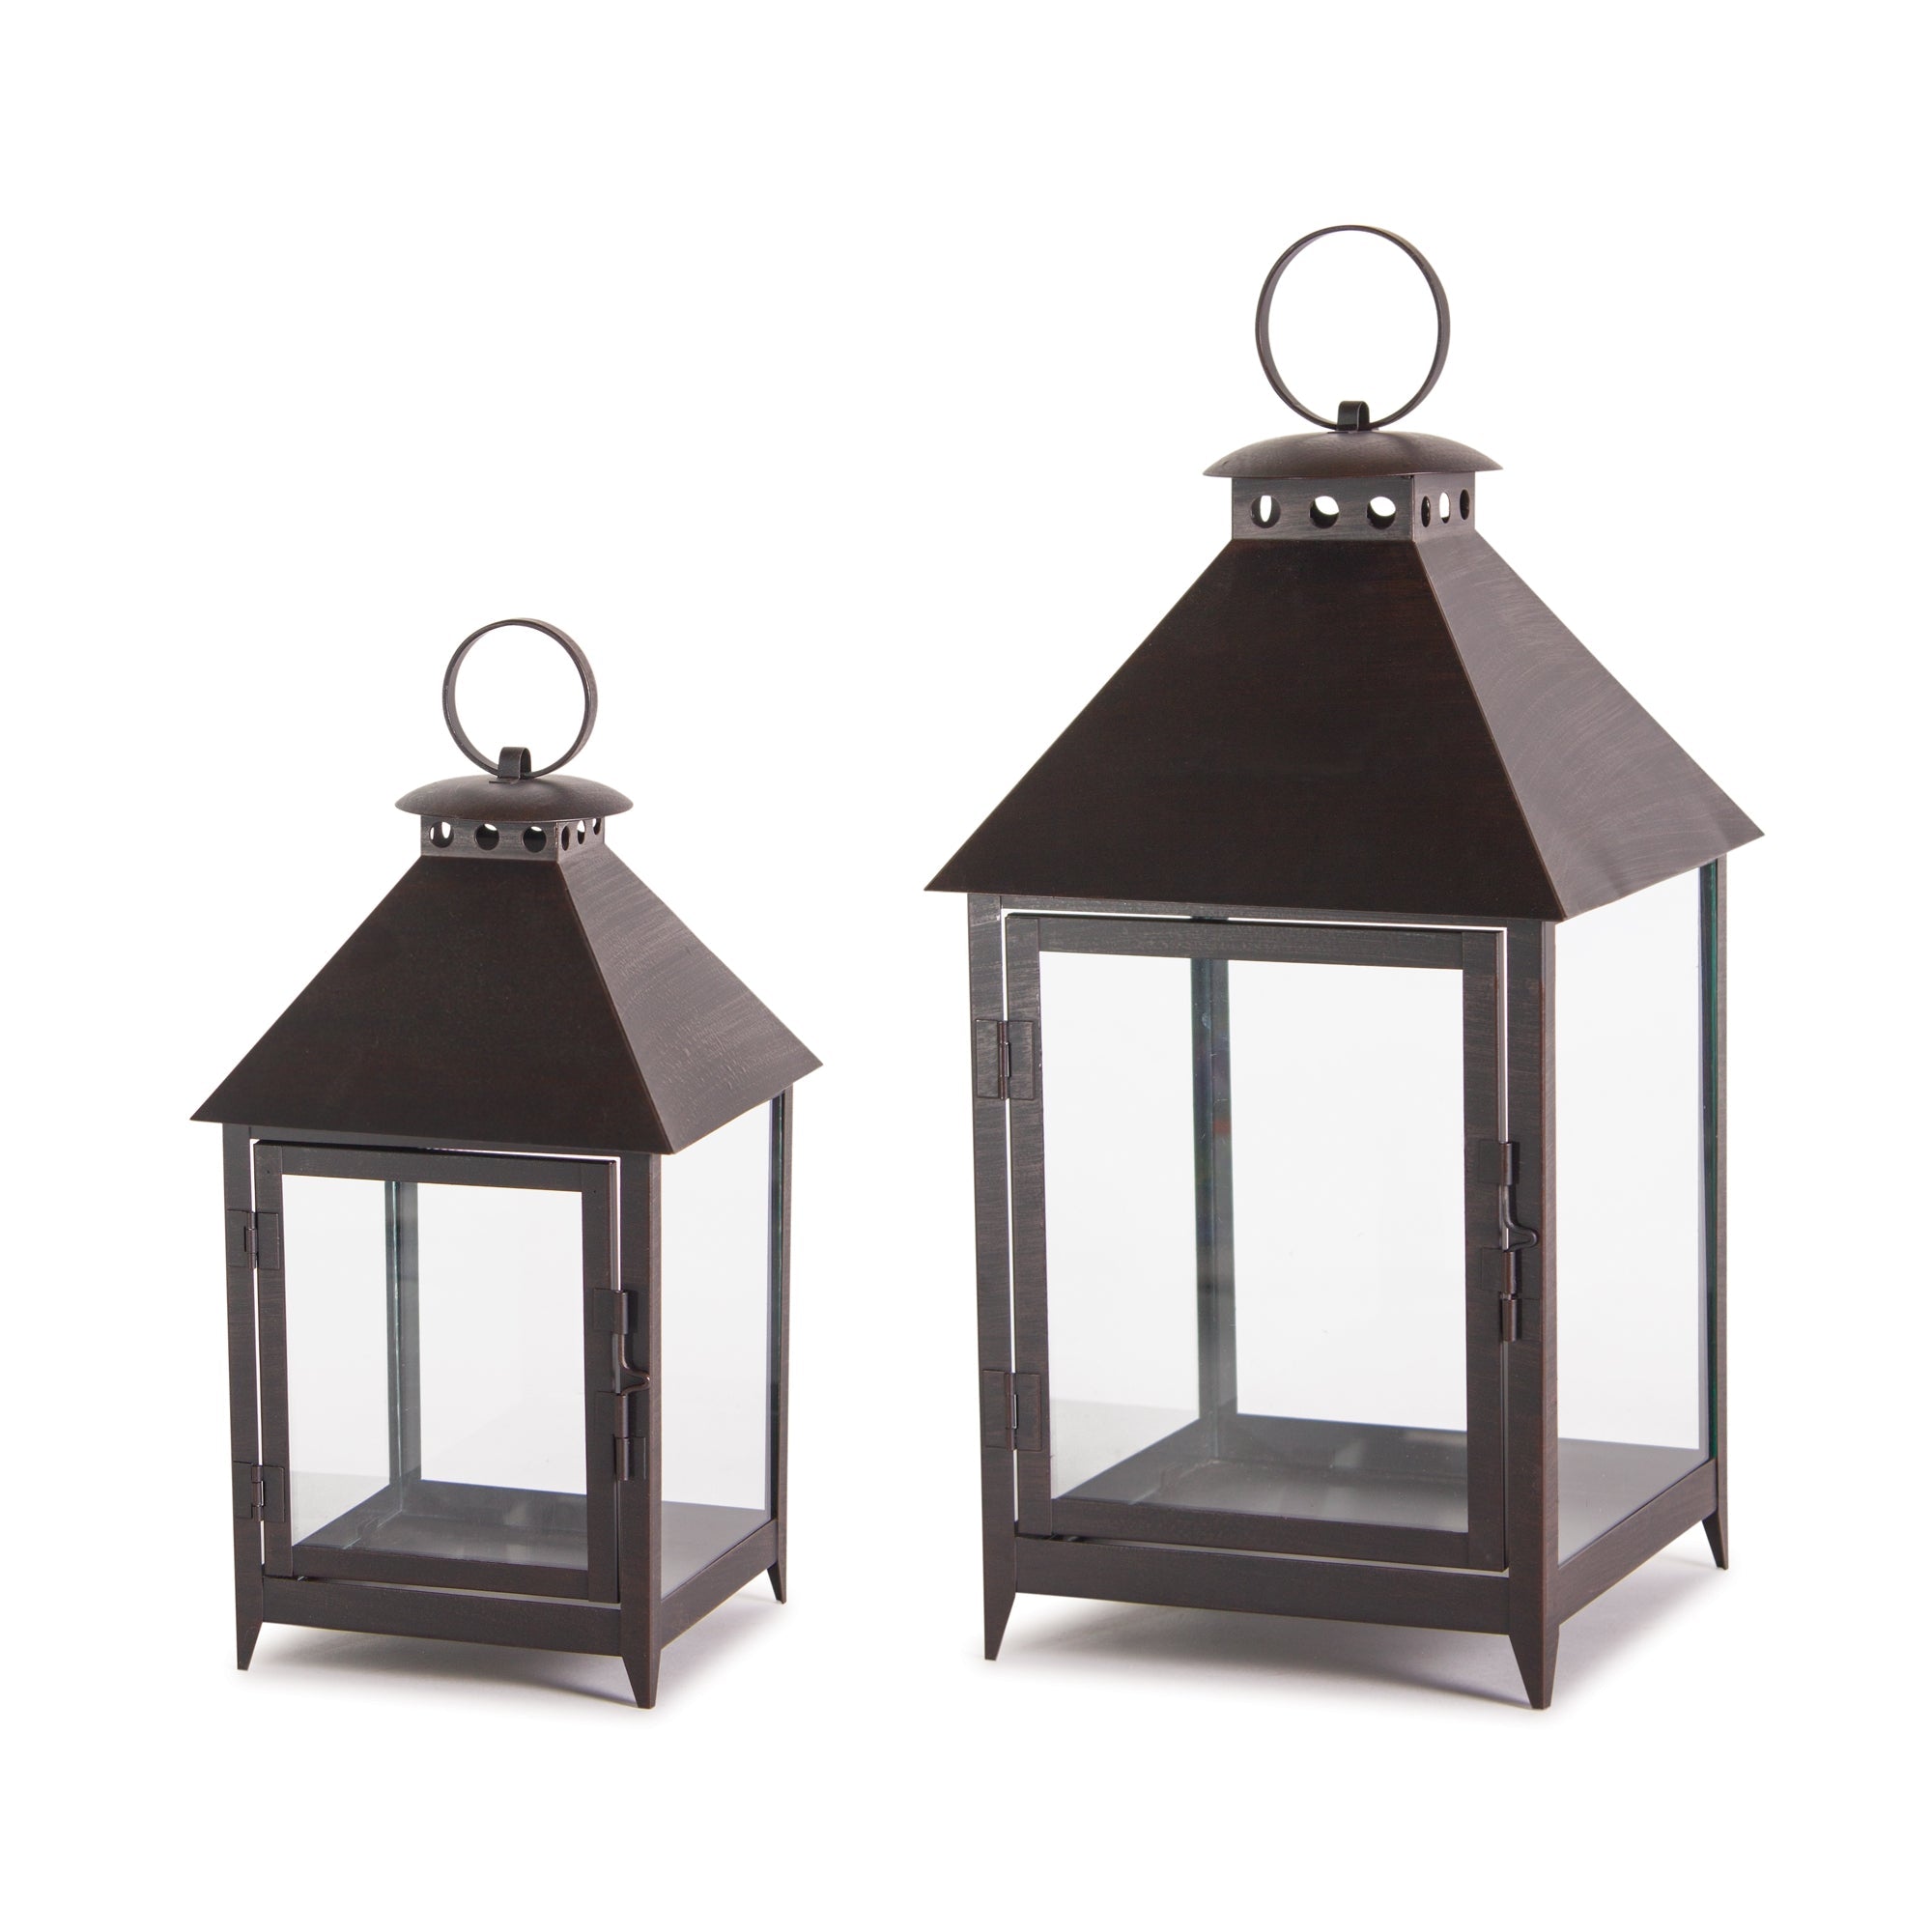 Set-Of-Two-Black-Flameless-Floor-Lantern-Candle-Holder-Candle-Holders